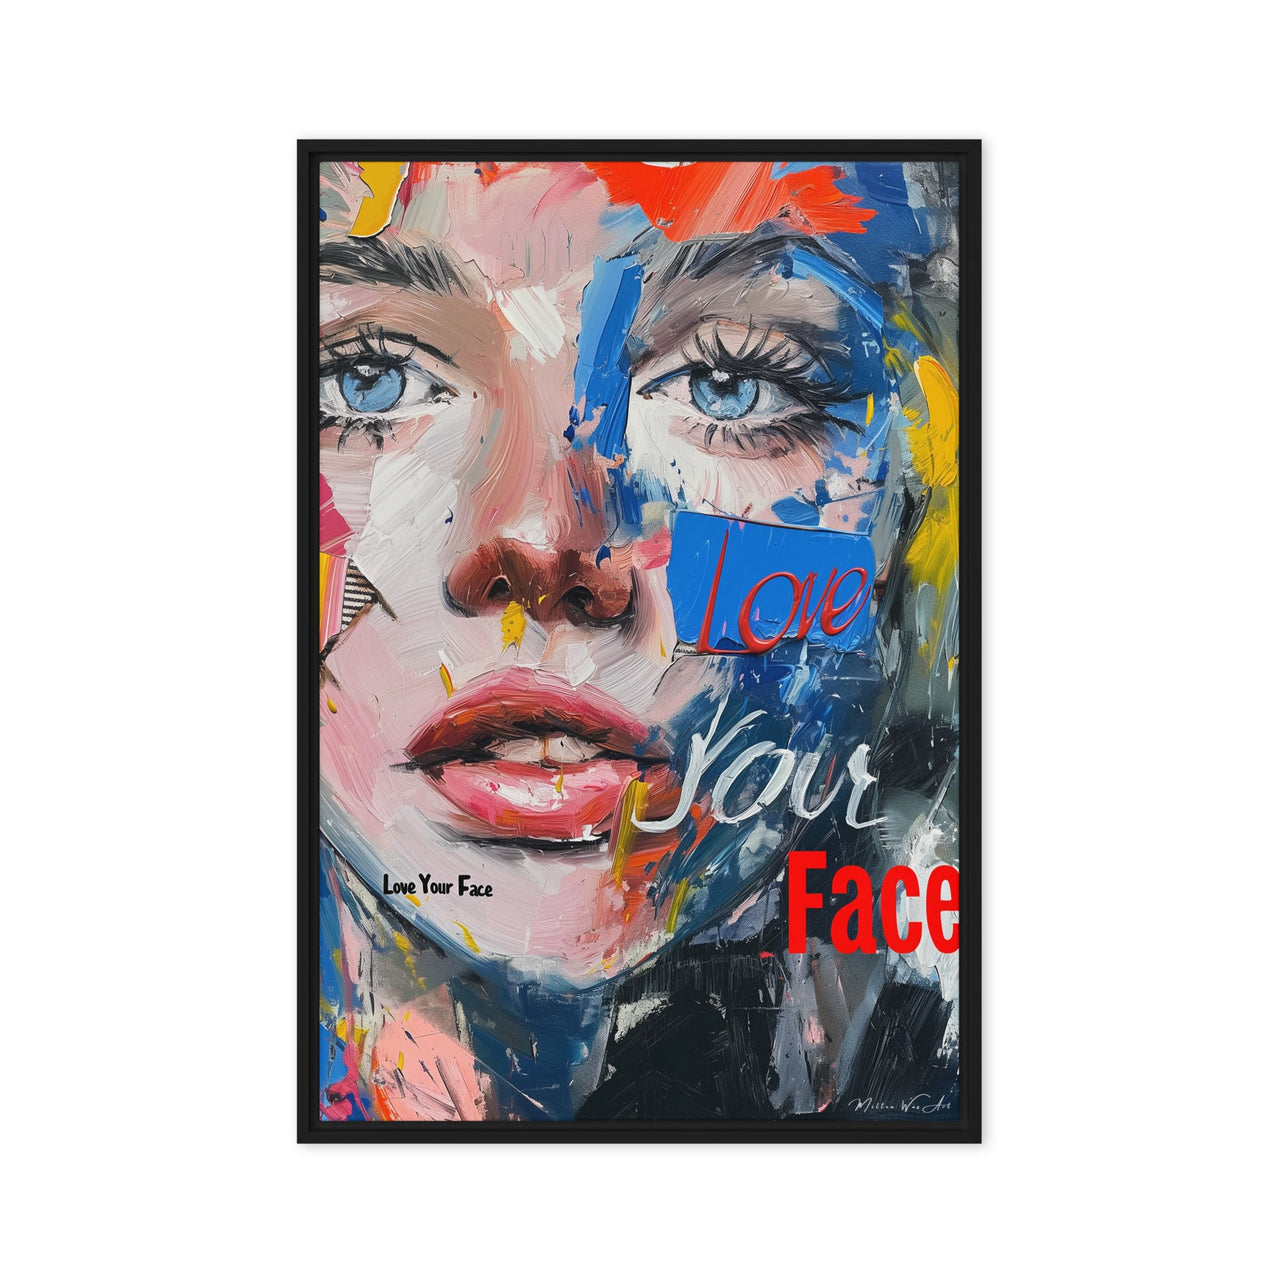 Expressive and colorful framed canvas art piece titled 'Love Your Face' with a vivid, abstract portrait from Milton Wes Art, adorning a minimalist space, available at miltonwesart.com, Harlem NYC